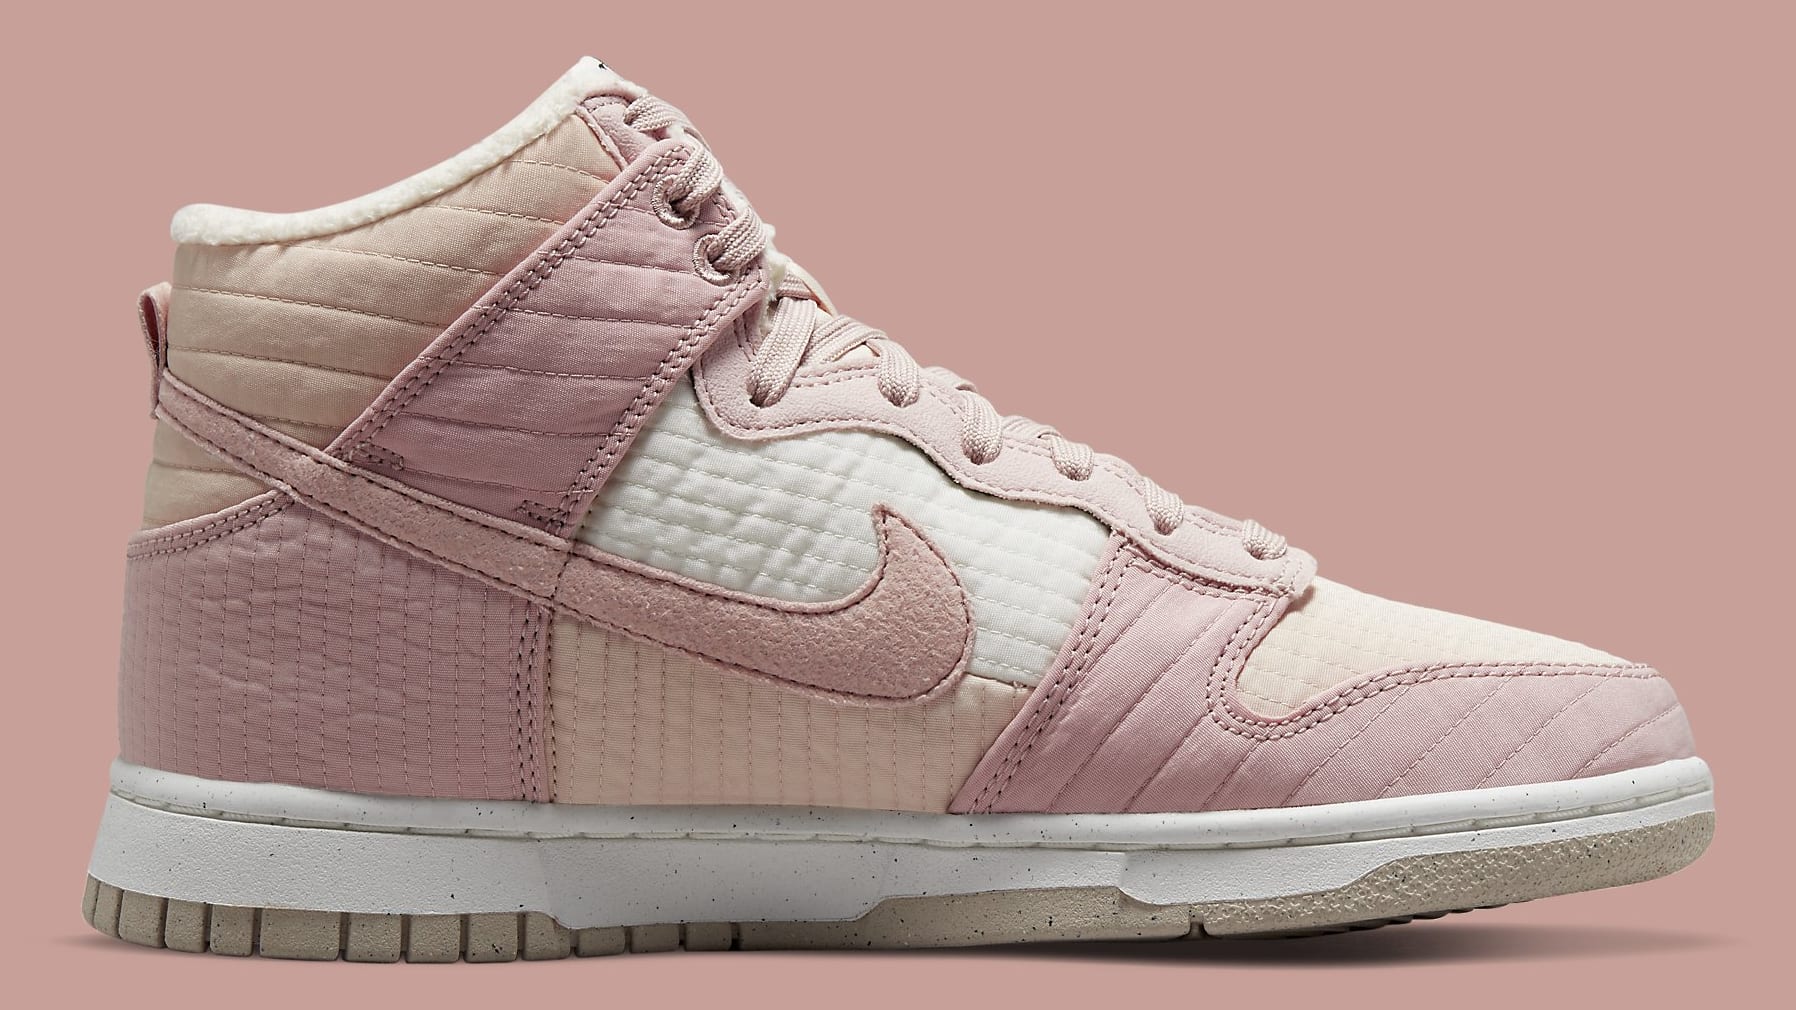 Nike Dunk High Toasty Pink DN9909-200 Release Date Medial